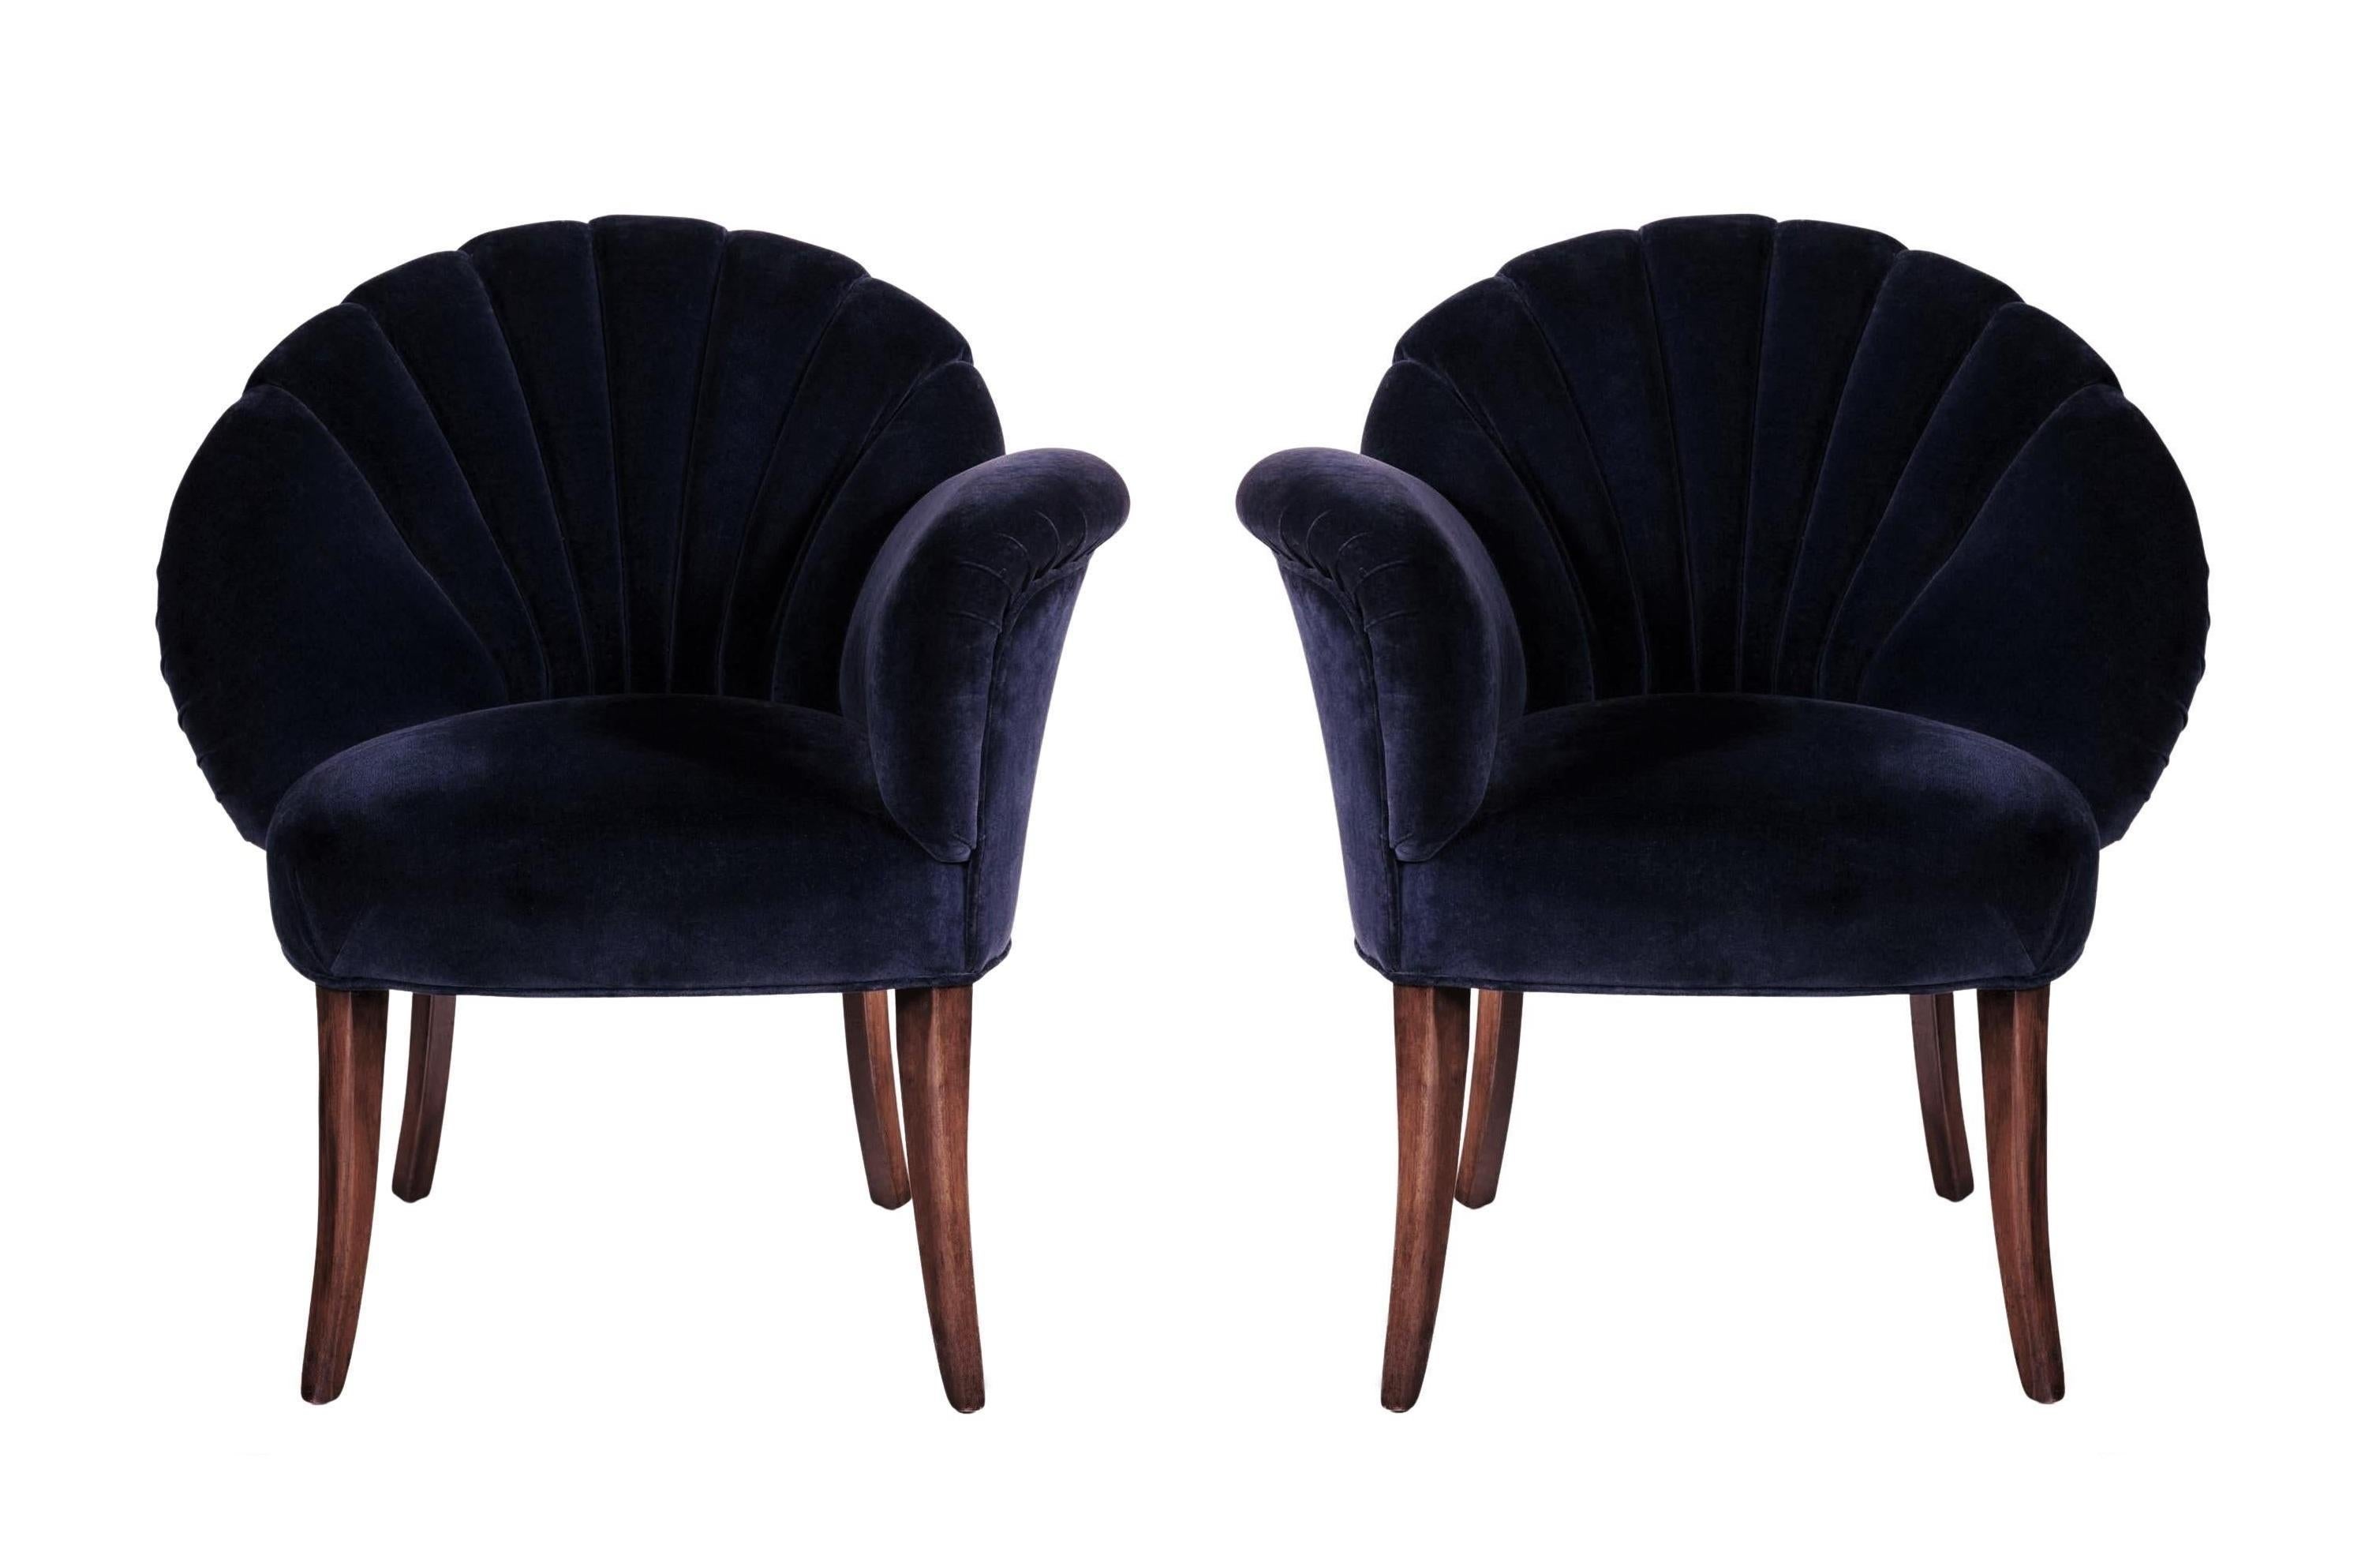 A sight to behold! These gorgeous asymmetrical chairs exemplify the glamour of the Hollywood era. Art Deco’s signature clean, streamlined forms encourage the eye to glide along the smooth, uninterrupted outline of the design. A trend that hasn't